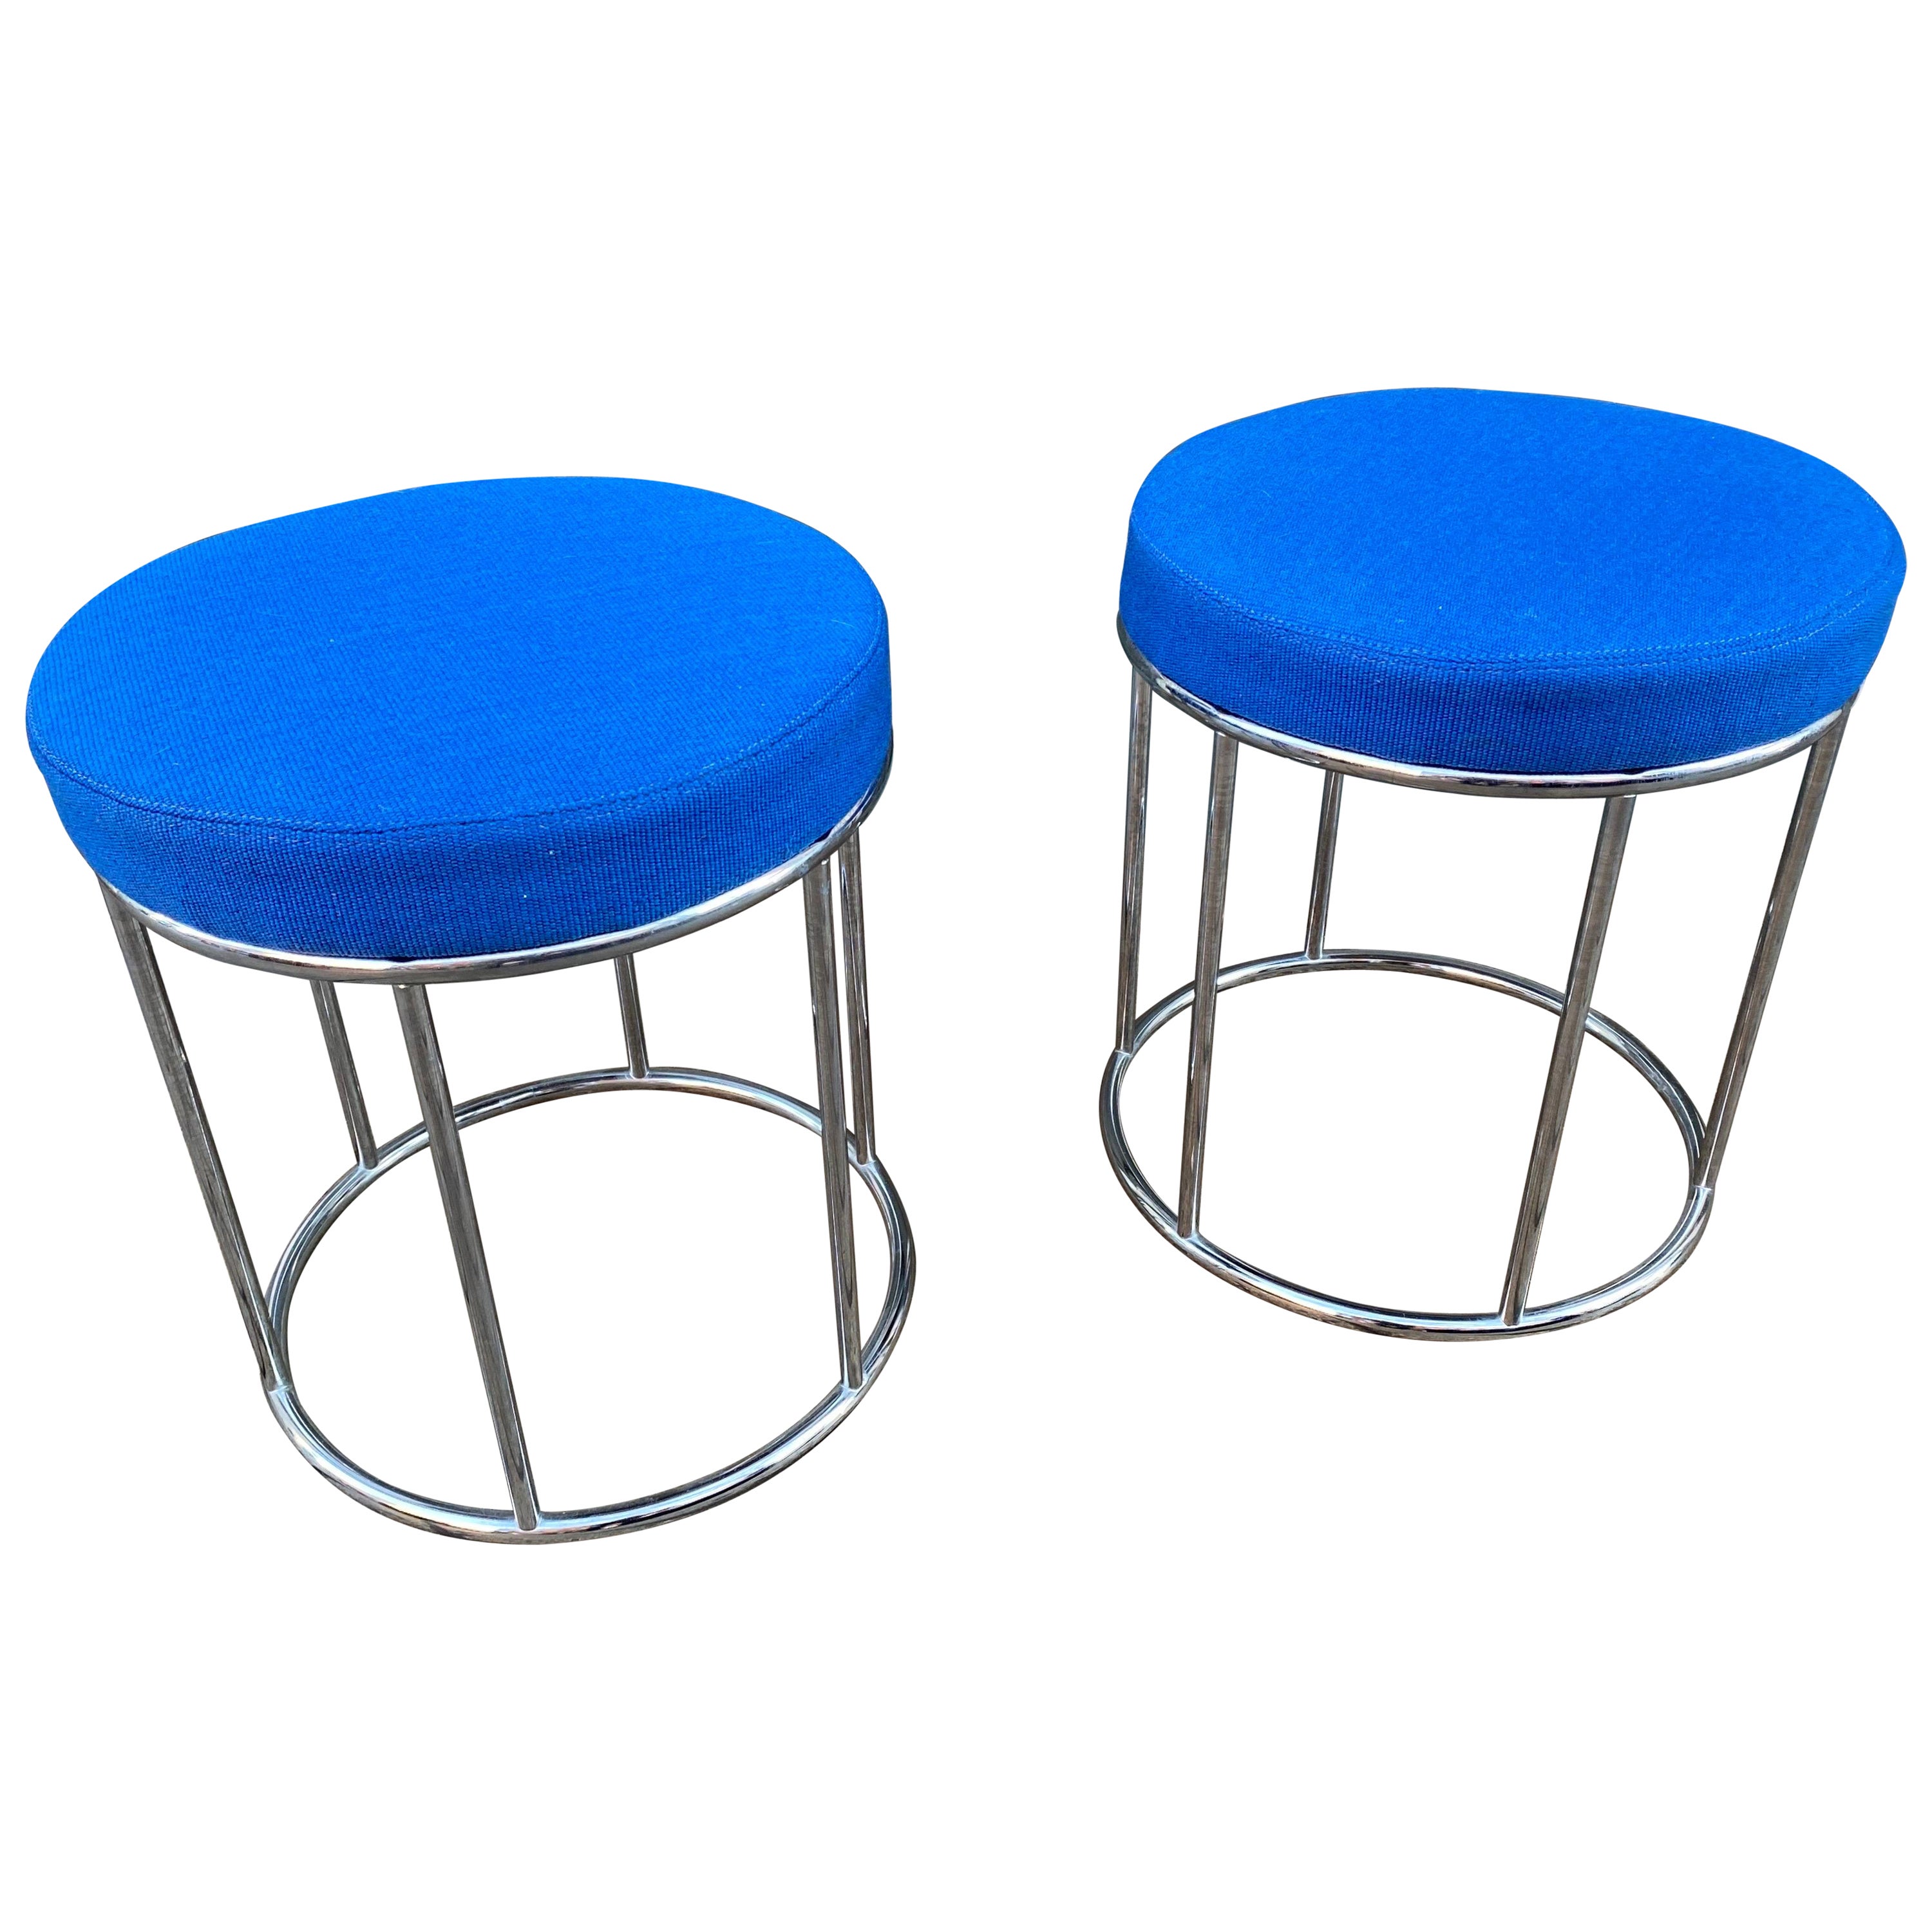 Milo Baughman Style Pair of Round Chrome Stools with Blue Upholstery